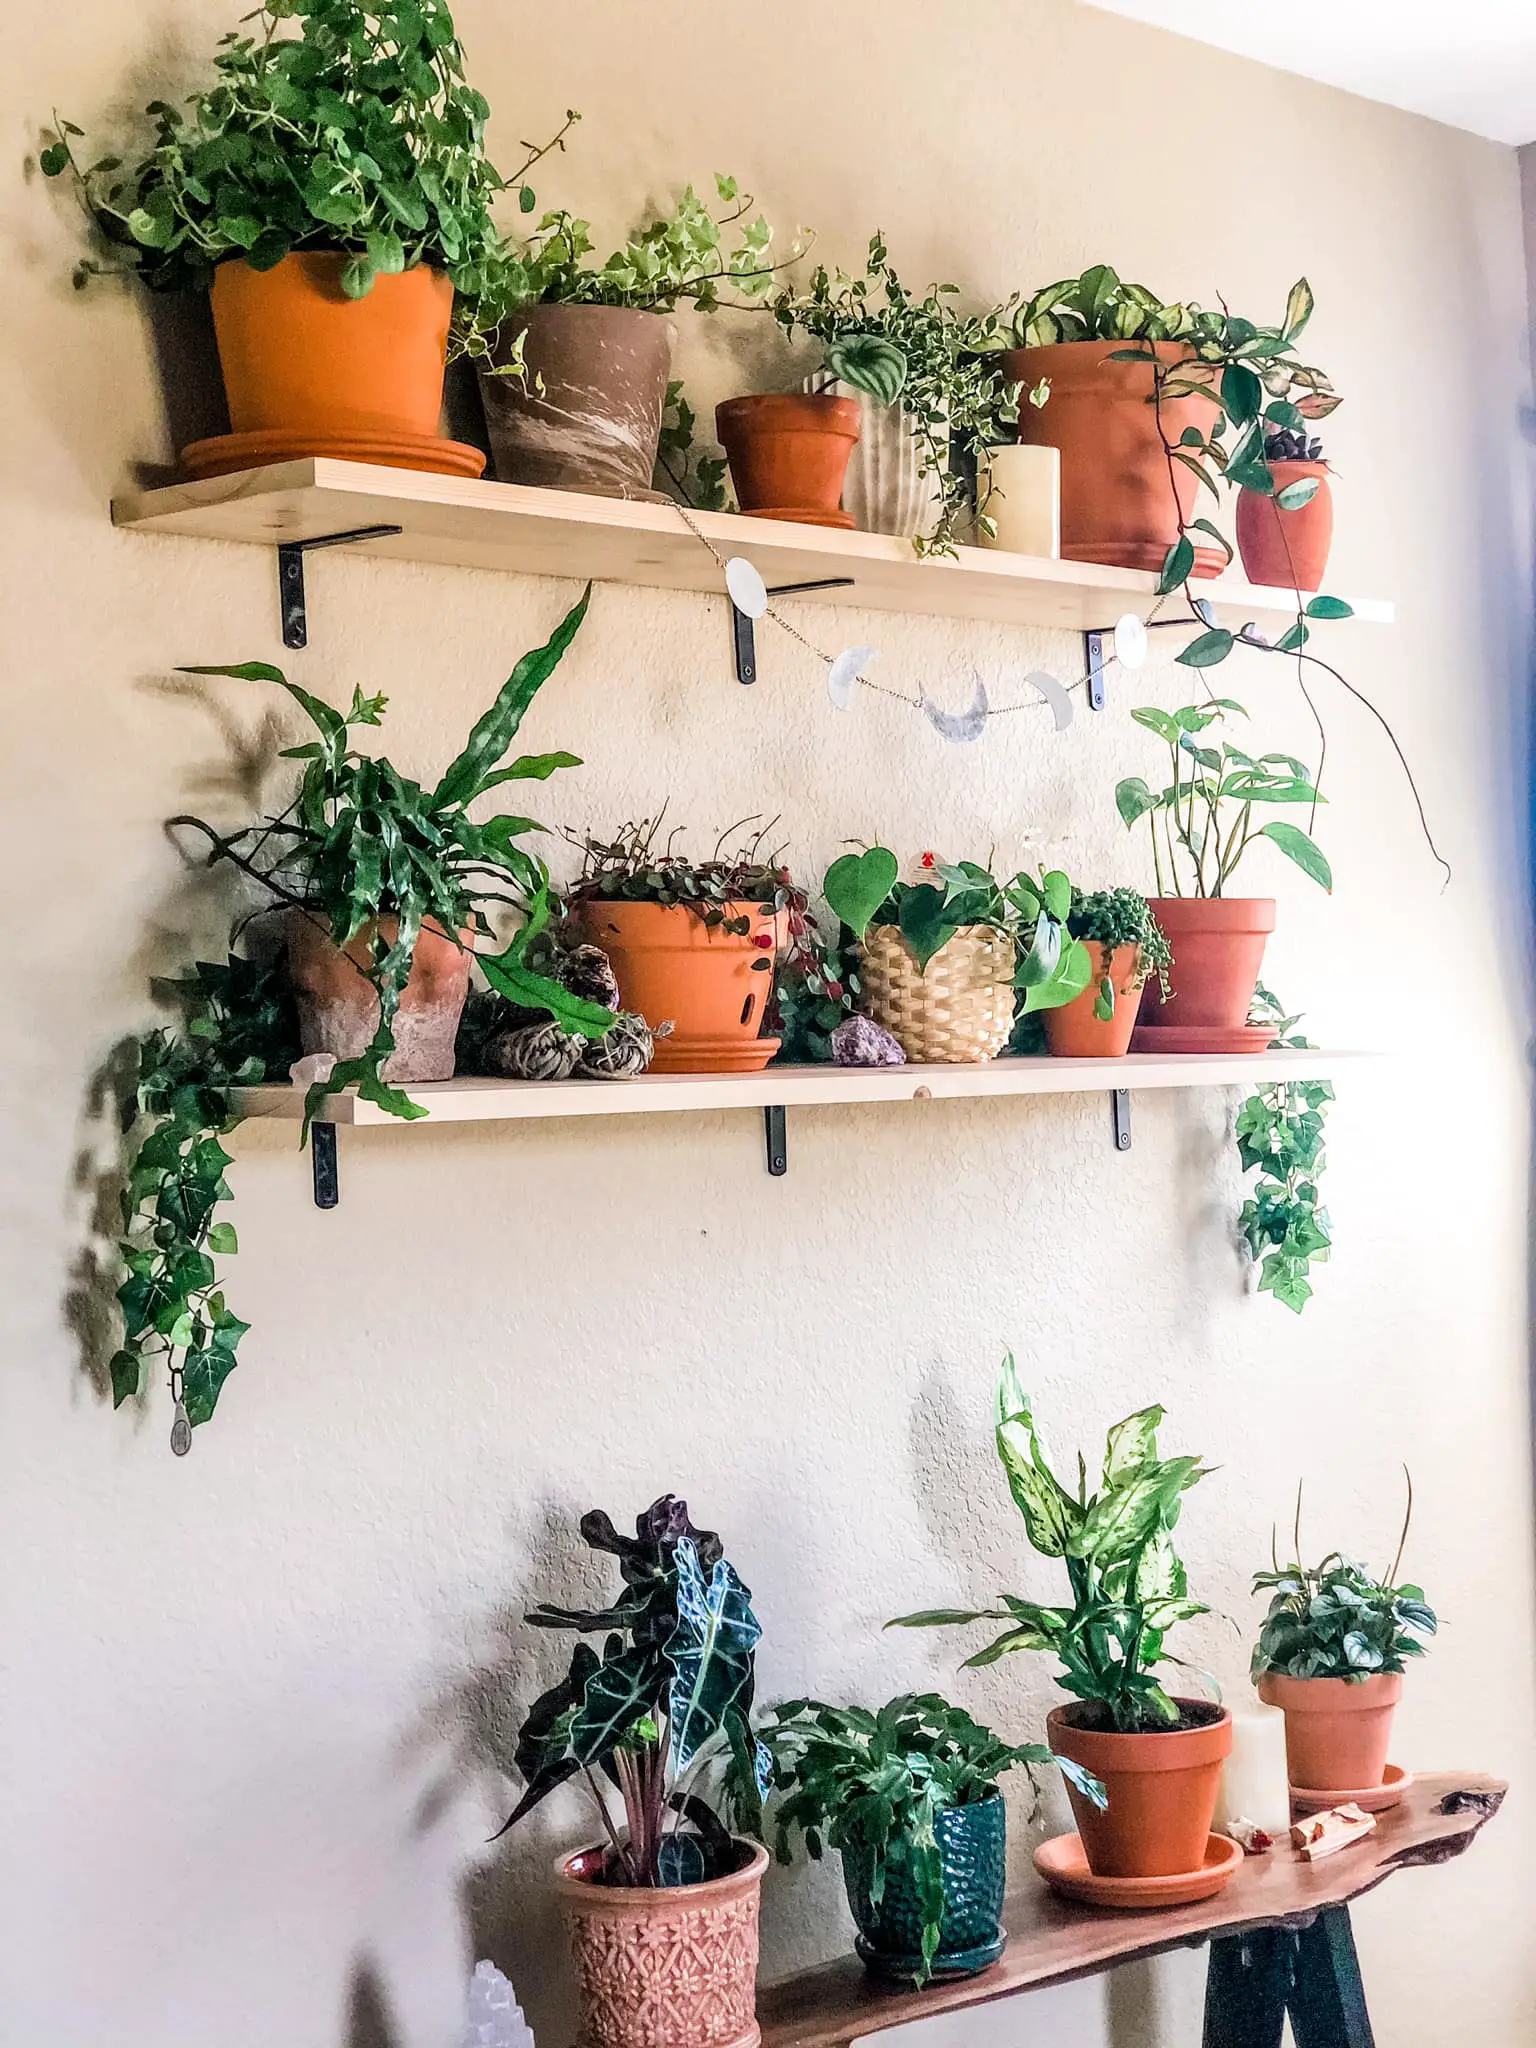 Shelf and Table Full of Collector Plants